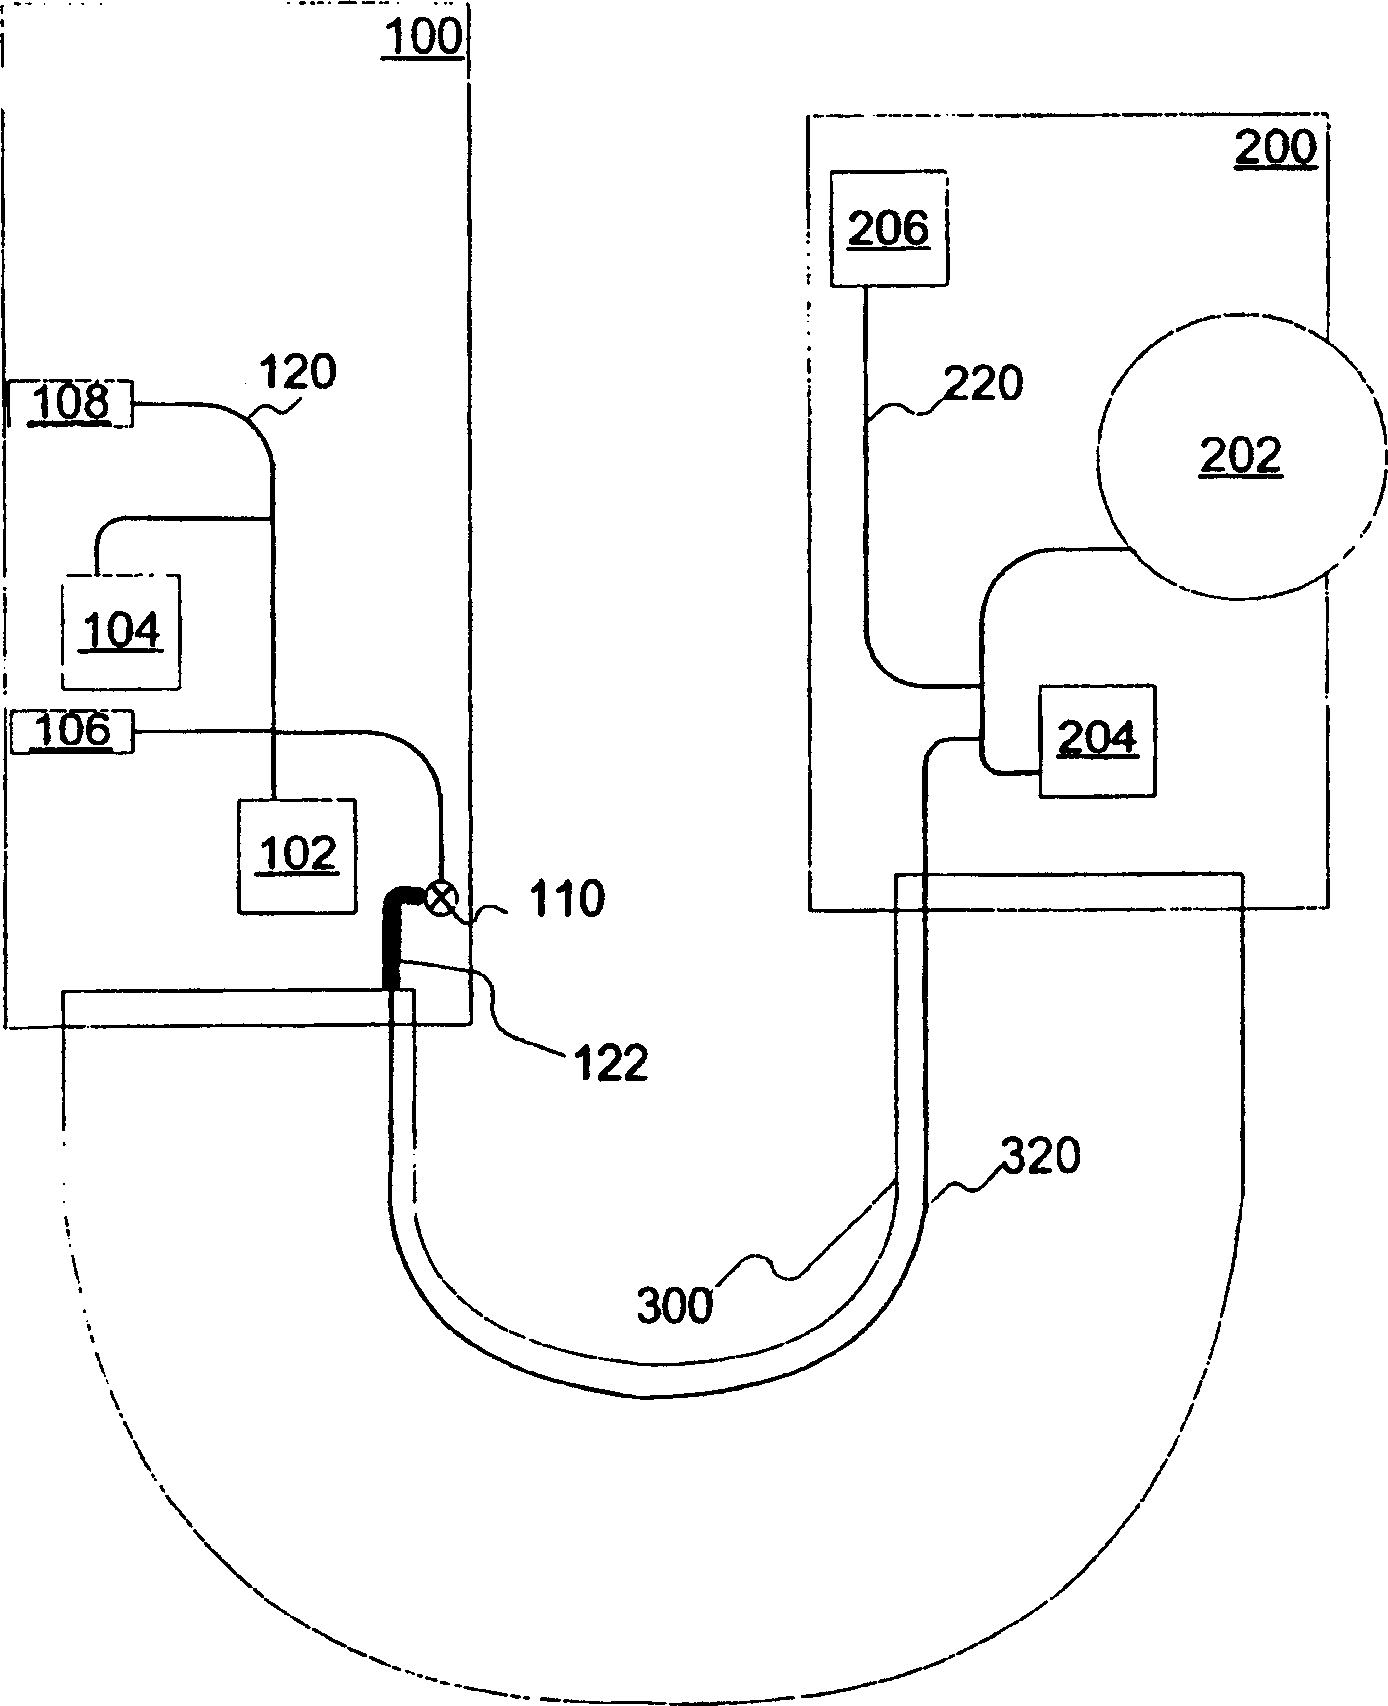 Electrostatic discharge protection on circuit board